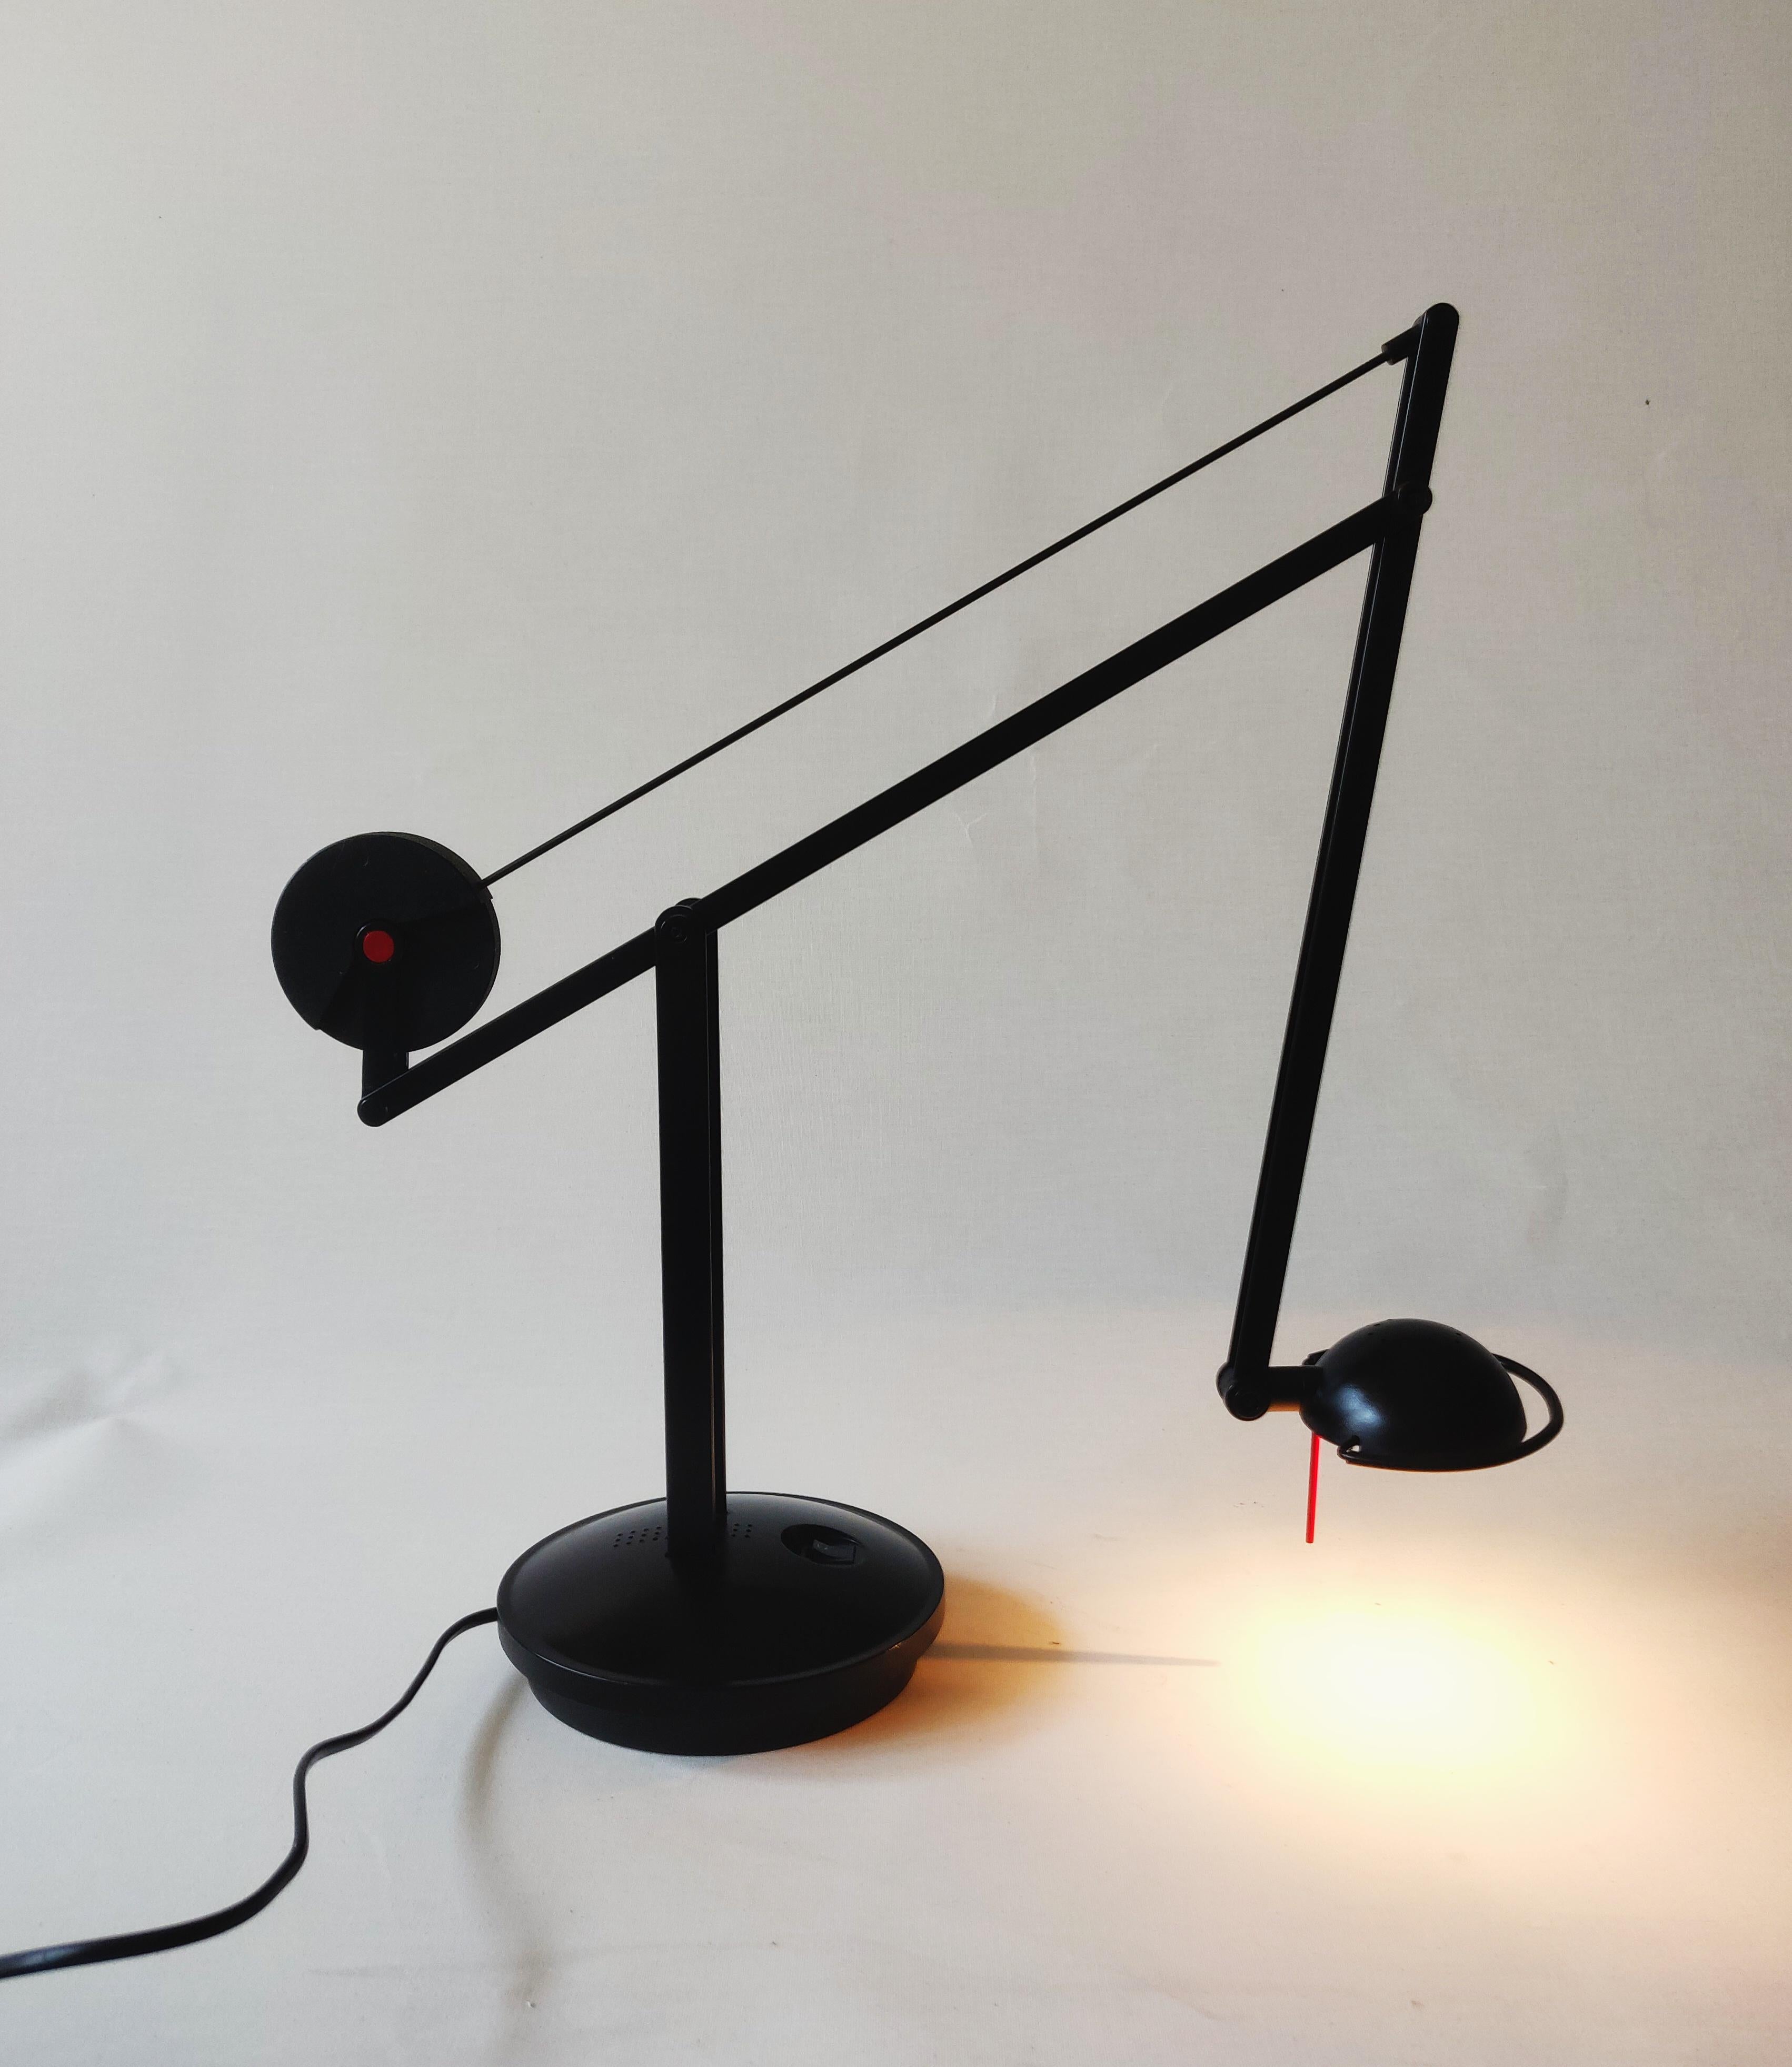 Counter Balance Architect Desk Lamp, 1980s In Good Condition For Sale In MIJDRECHT, NL